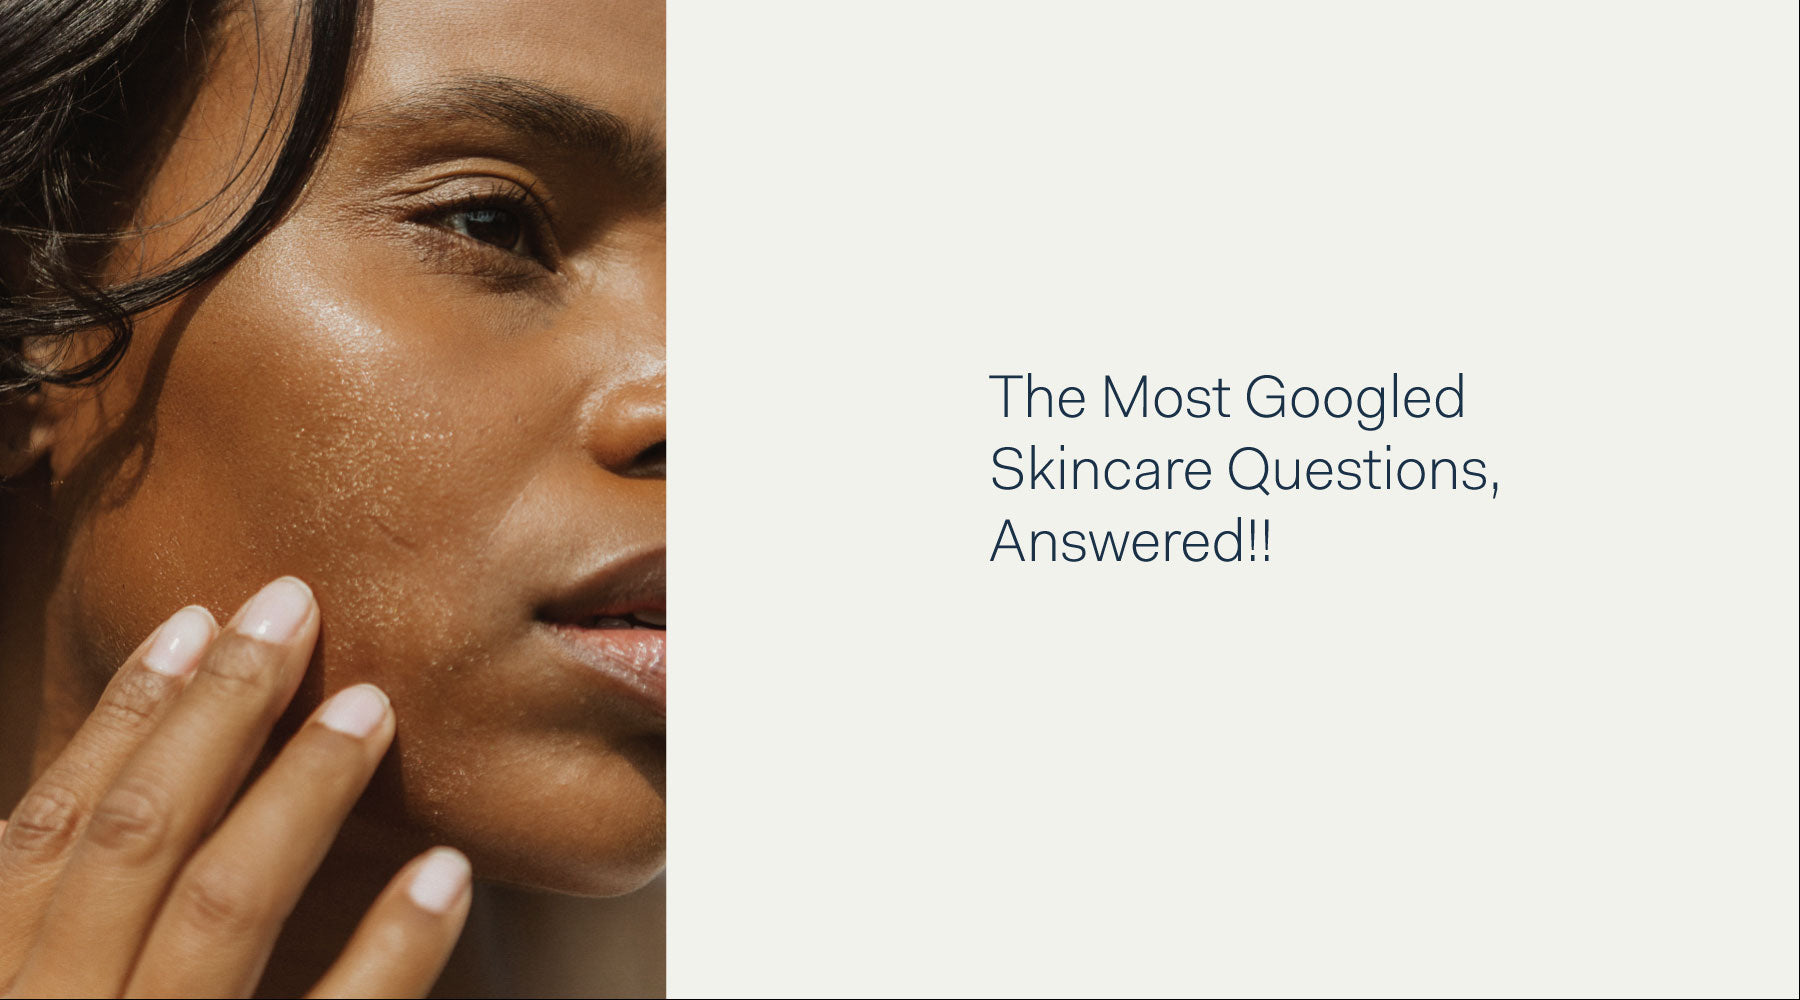 The most googled skincare questions answered text